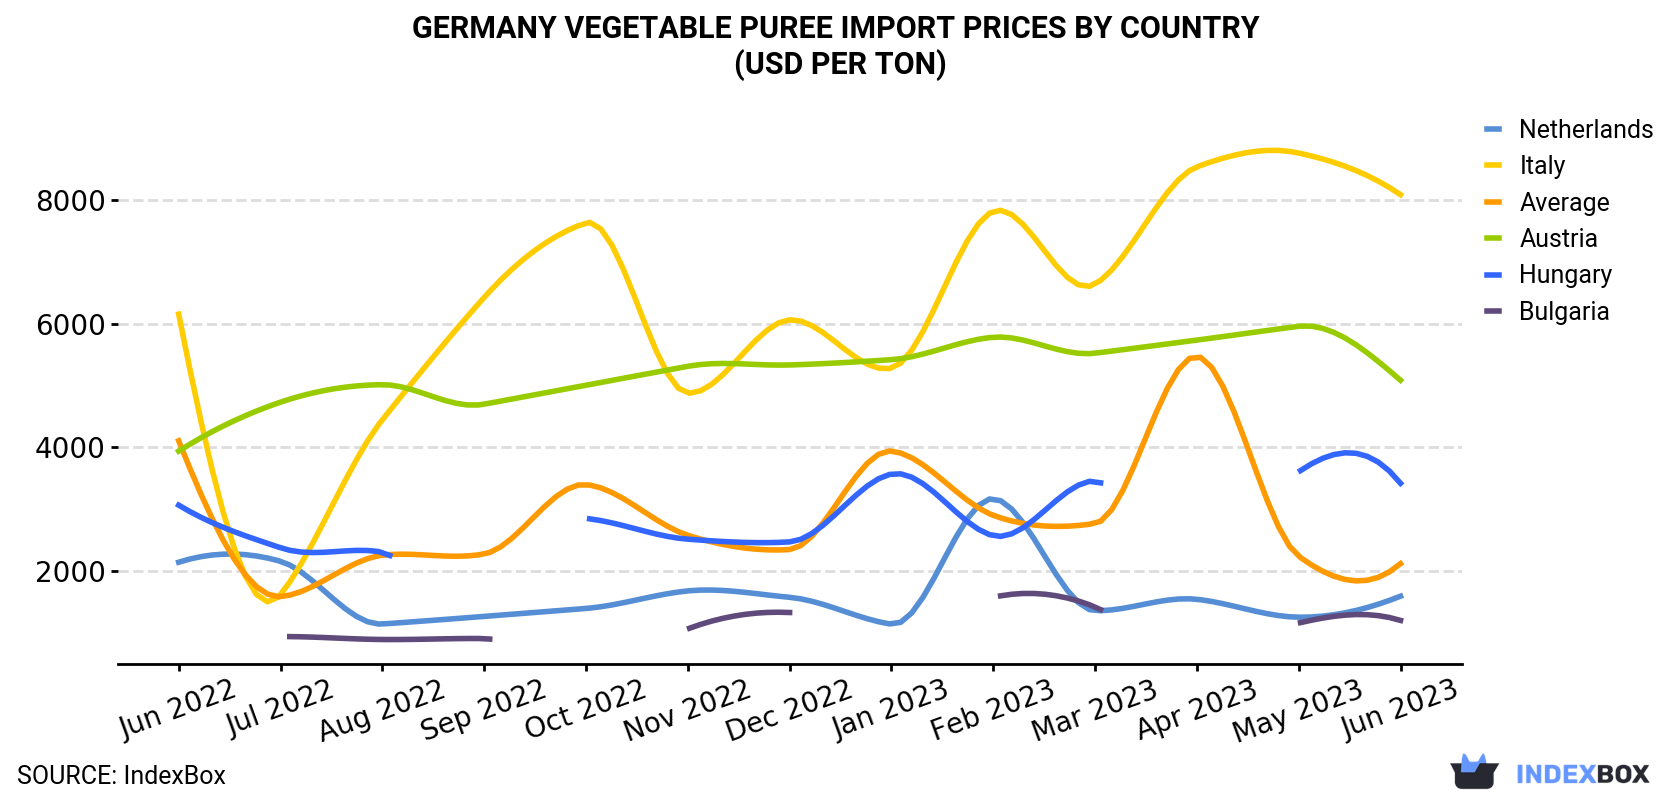 Germany Vegetable Puree Import Prices By Country (USD Per Ton)